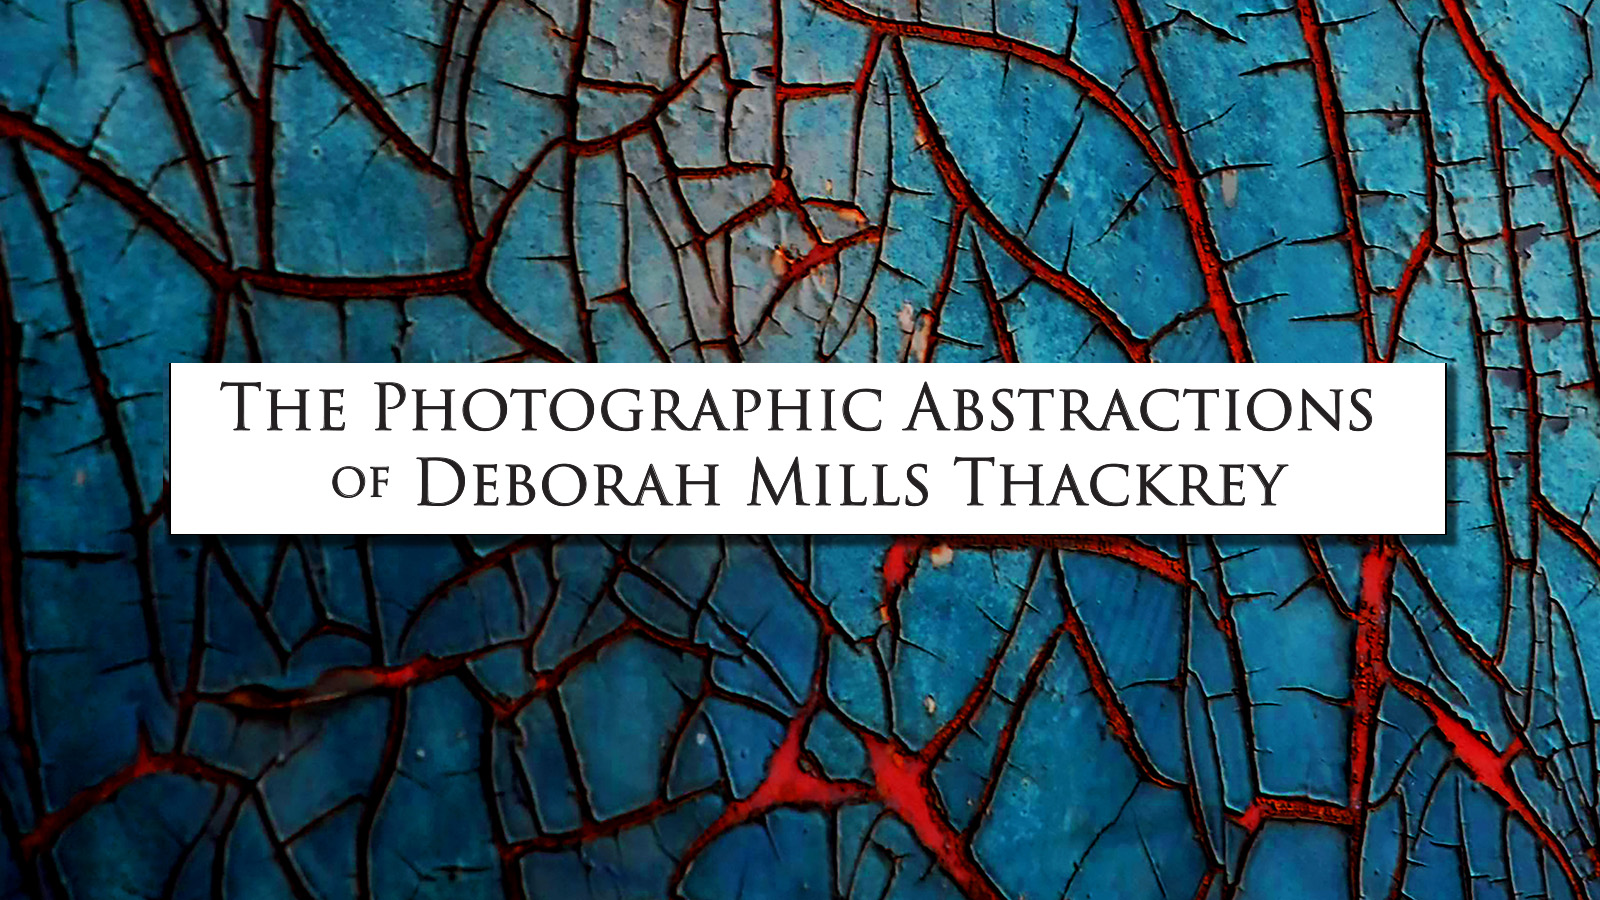 The Photographic Abstractions of Deborah Mills Thackrey